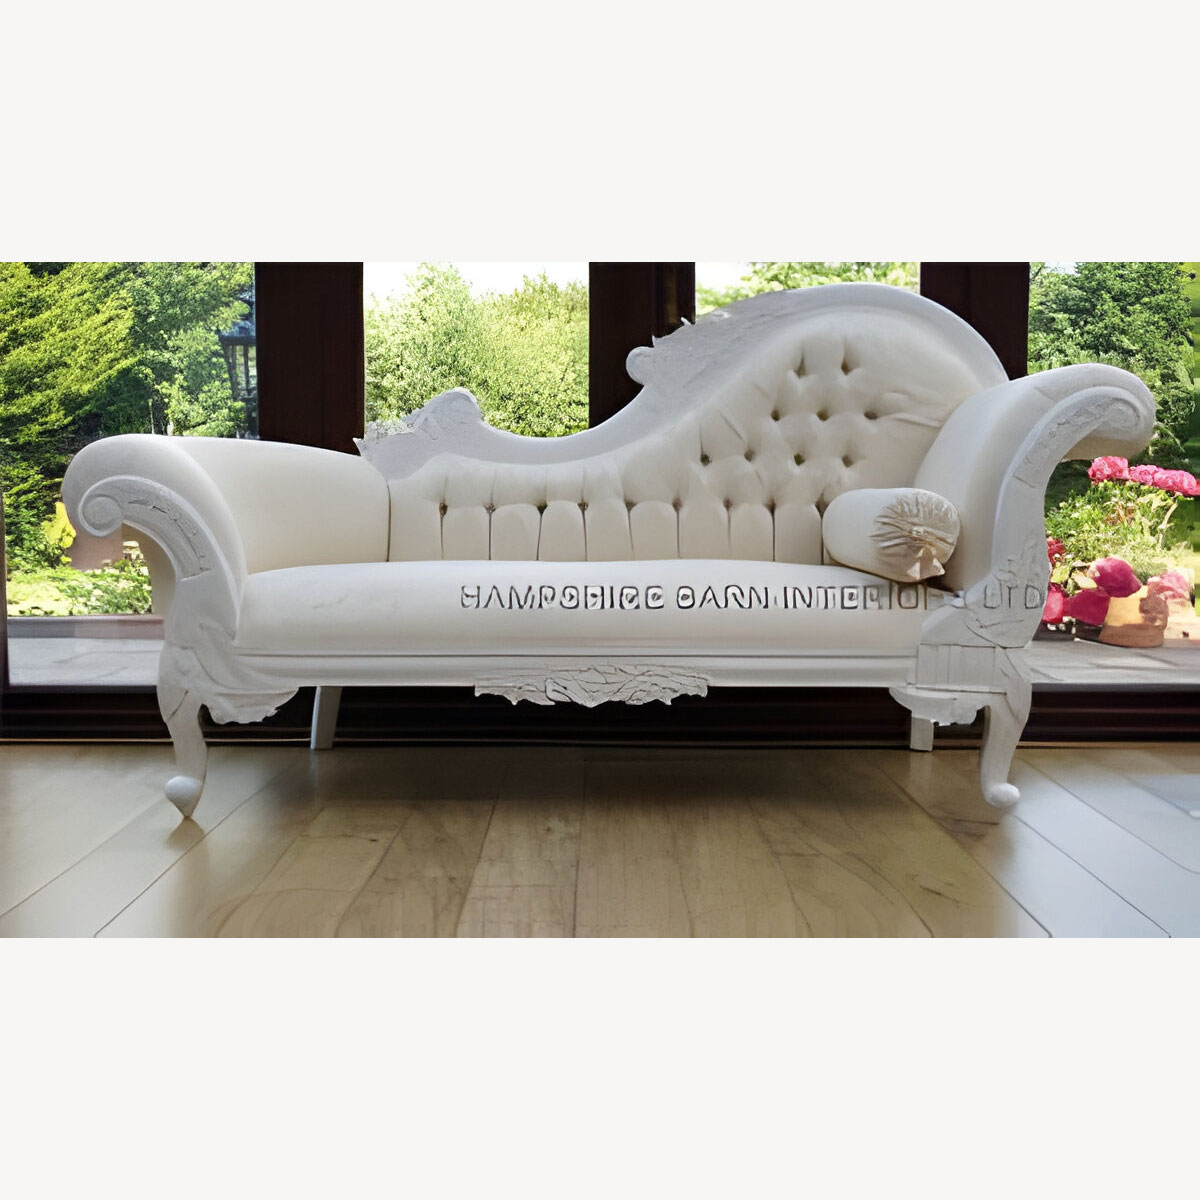 Antique White Wedding Stage Set 3 Piece Chaise Plus Two Matching Chairs With Crystals 3 - Hampshire Barn Interiors - Antique White Wedding Stage Set 3 Piece Chaise Plus Two Matching Chairs With Crystals -